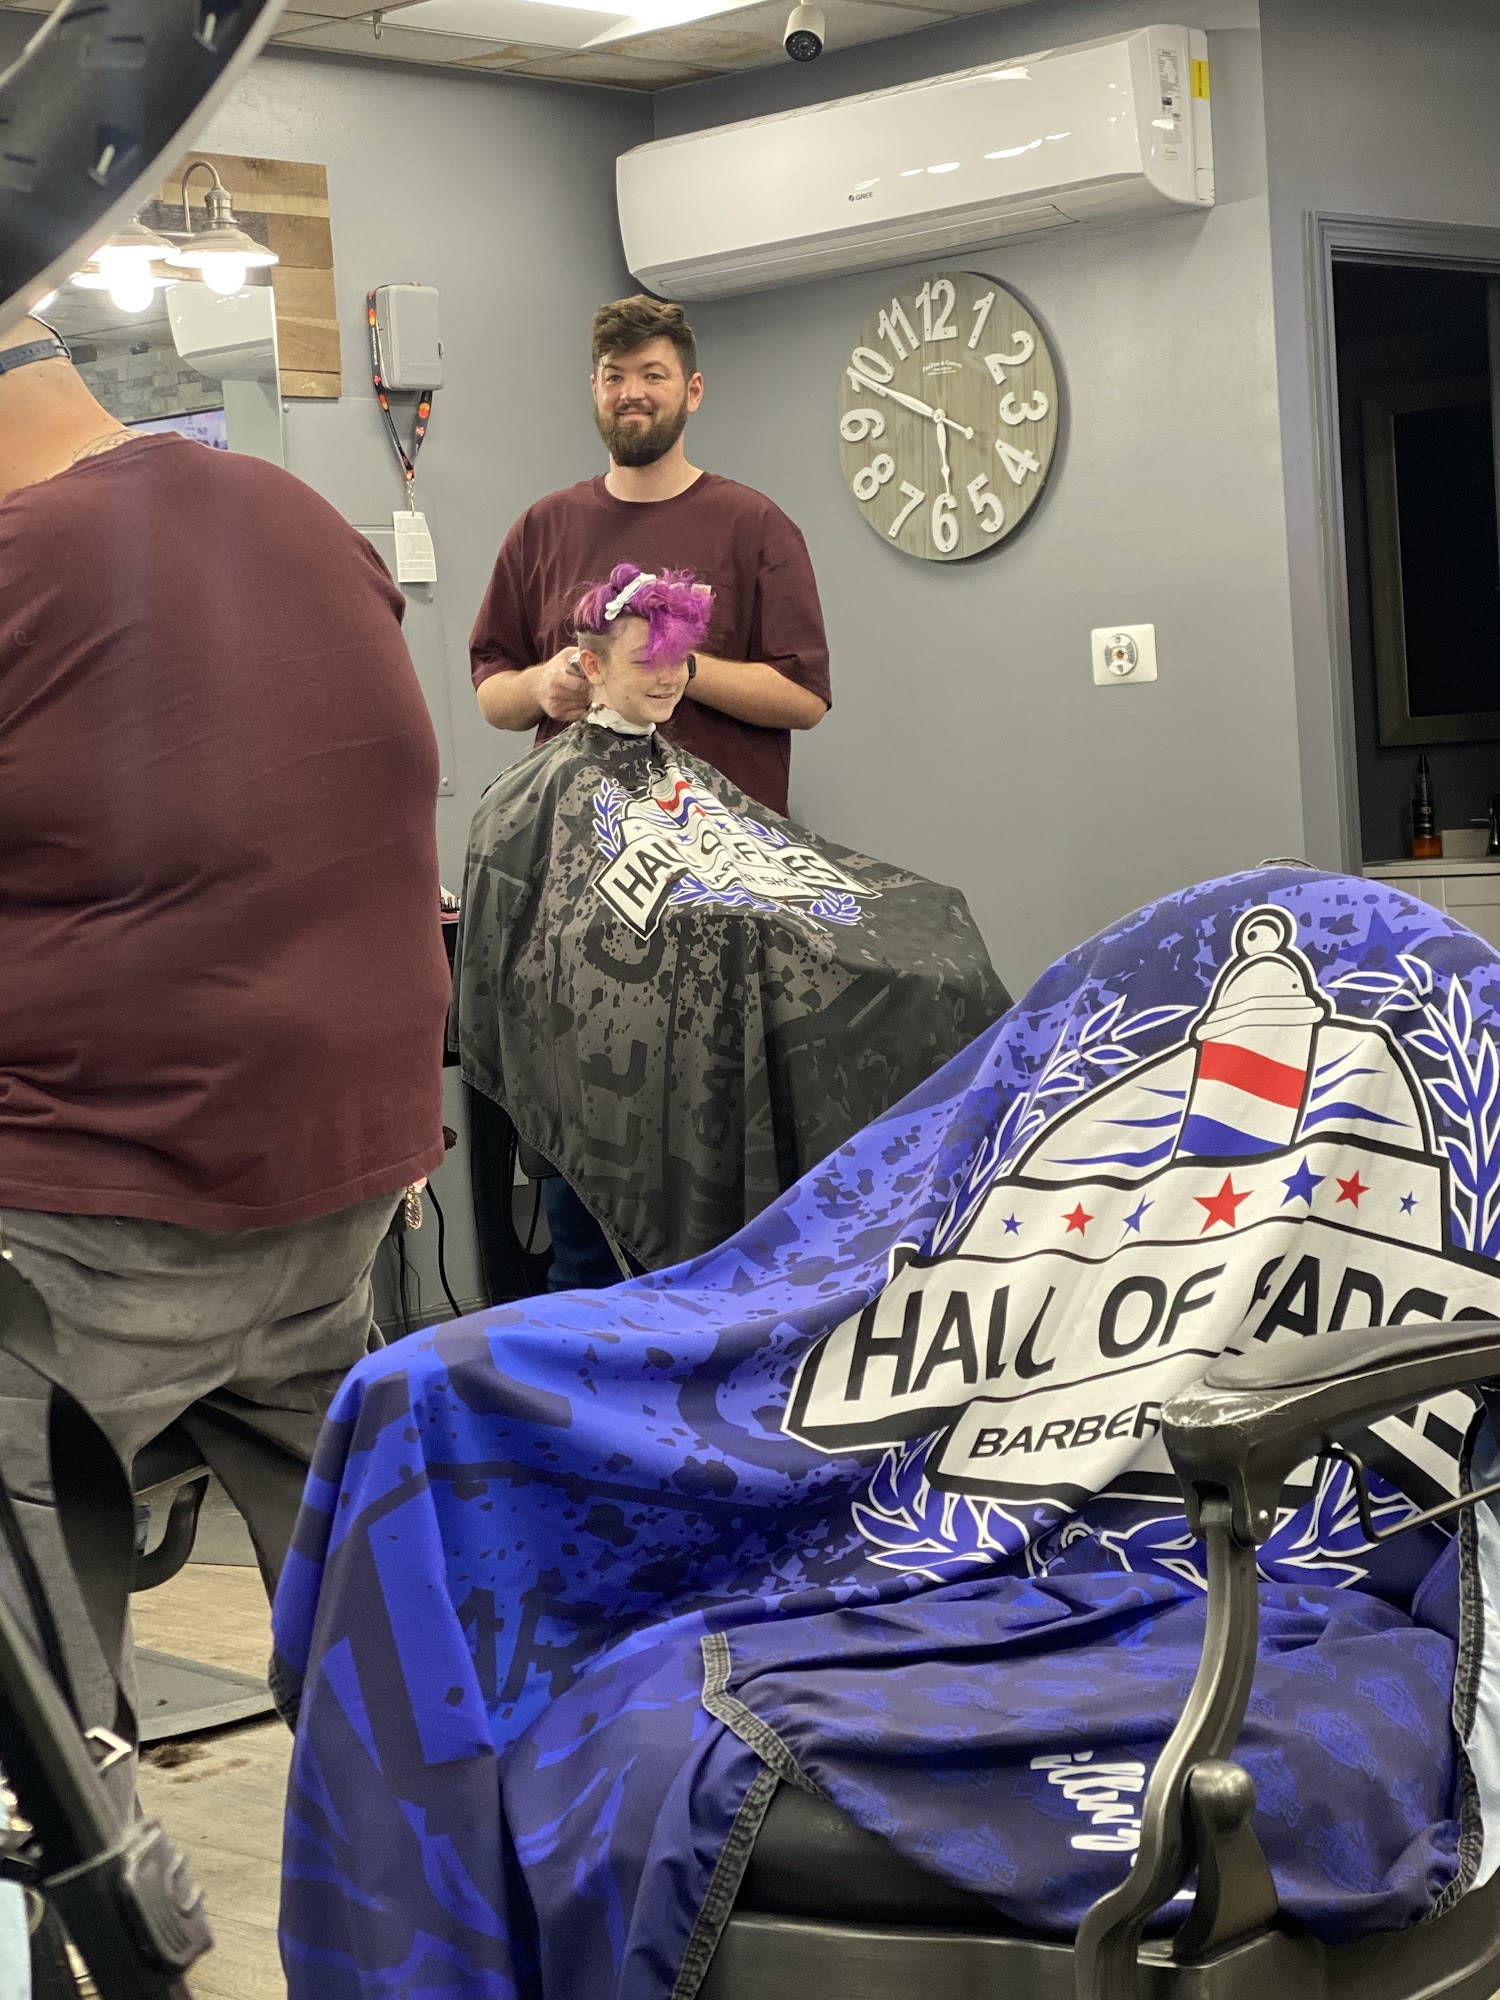 Hall Of Fades 1 Chace Rd, East Freetown Massachusetts 02717